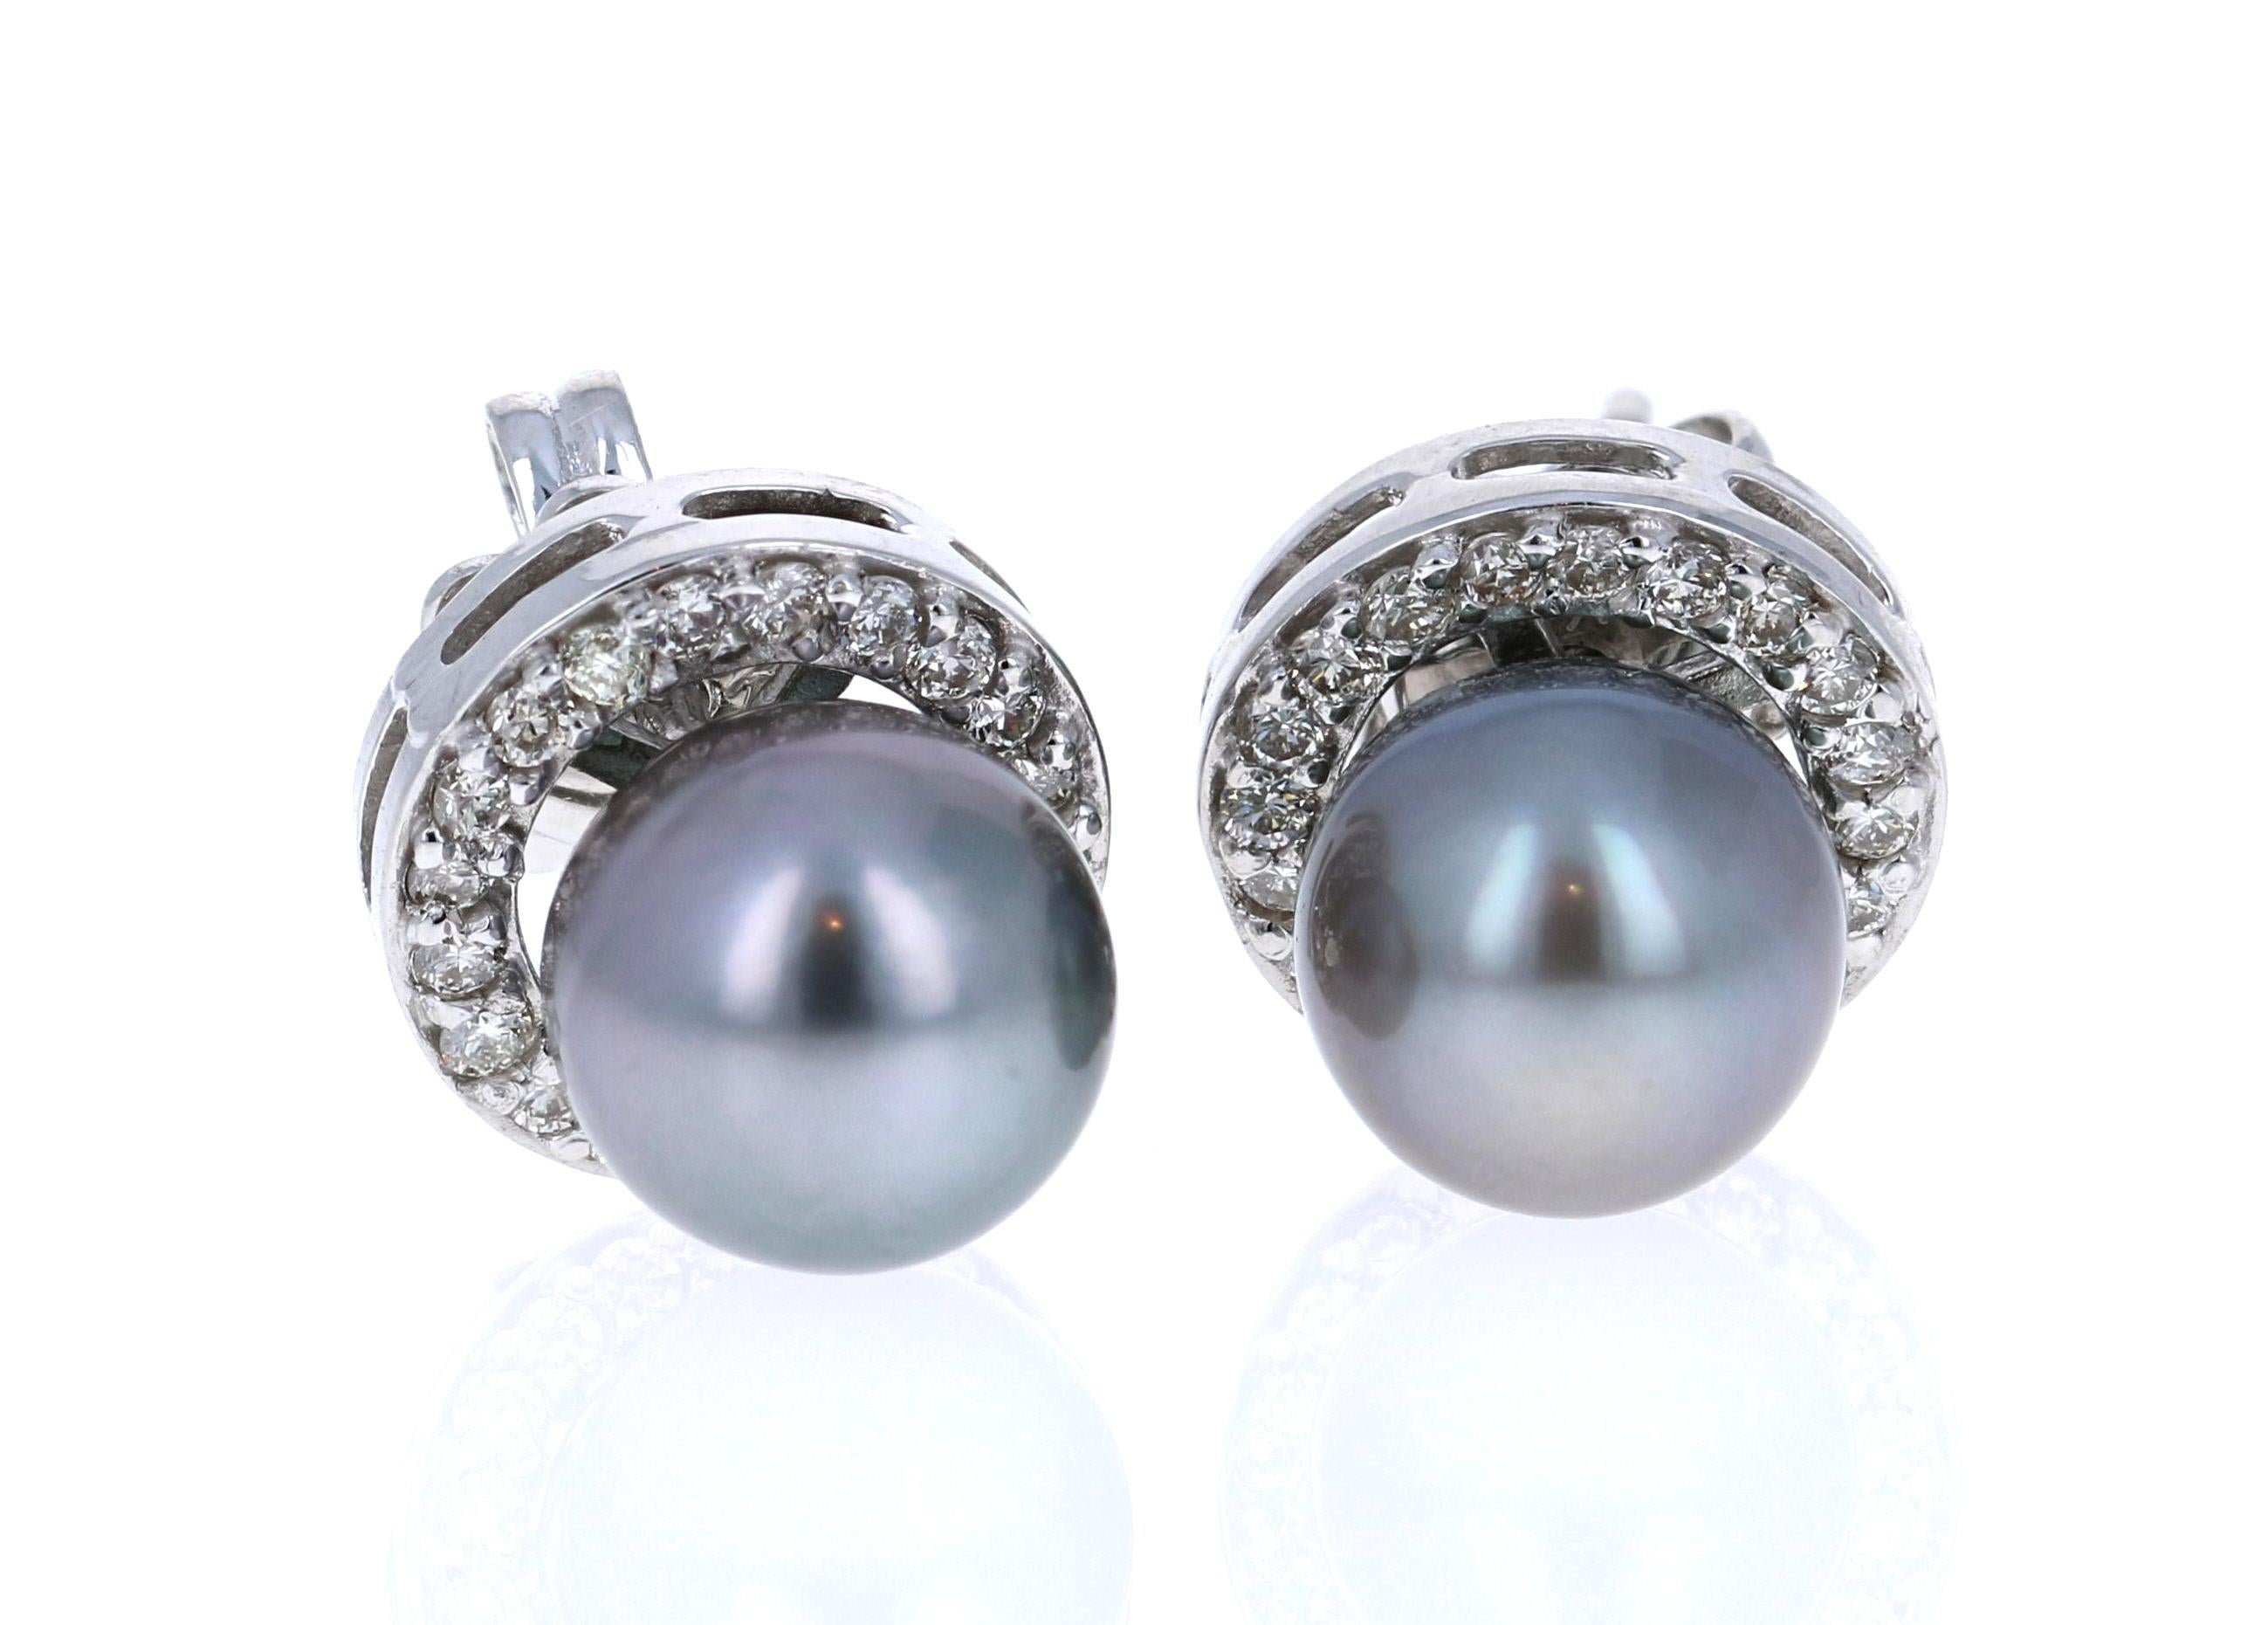 Tahitian Pearl Earrings that have 8 mm pearls and are surrounded by 40 Round Cut Diamonds that weigh 0.44 carats. 
The earrings are set in 14K White Gold and weigh approximately 2.8 grams. 

